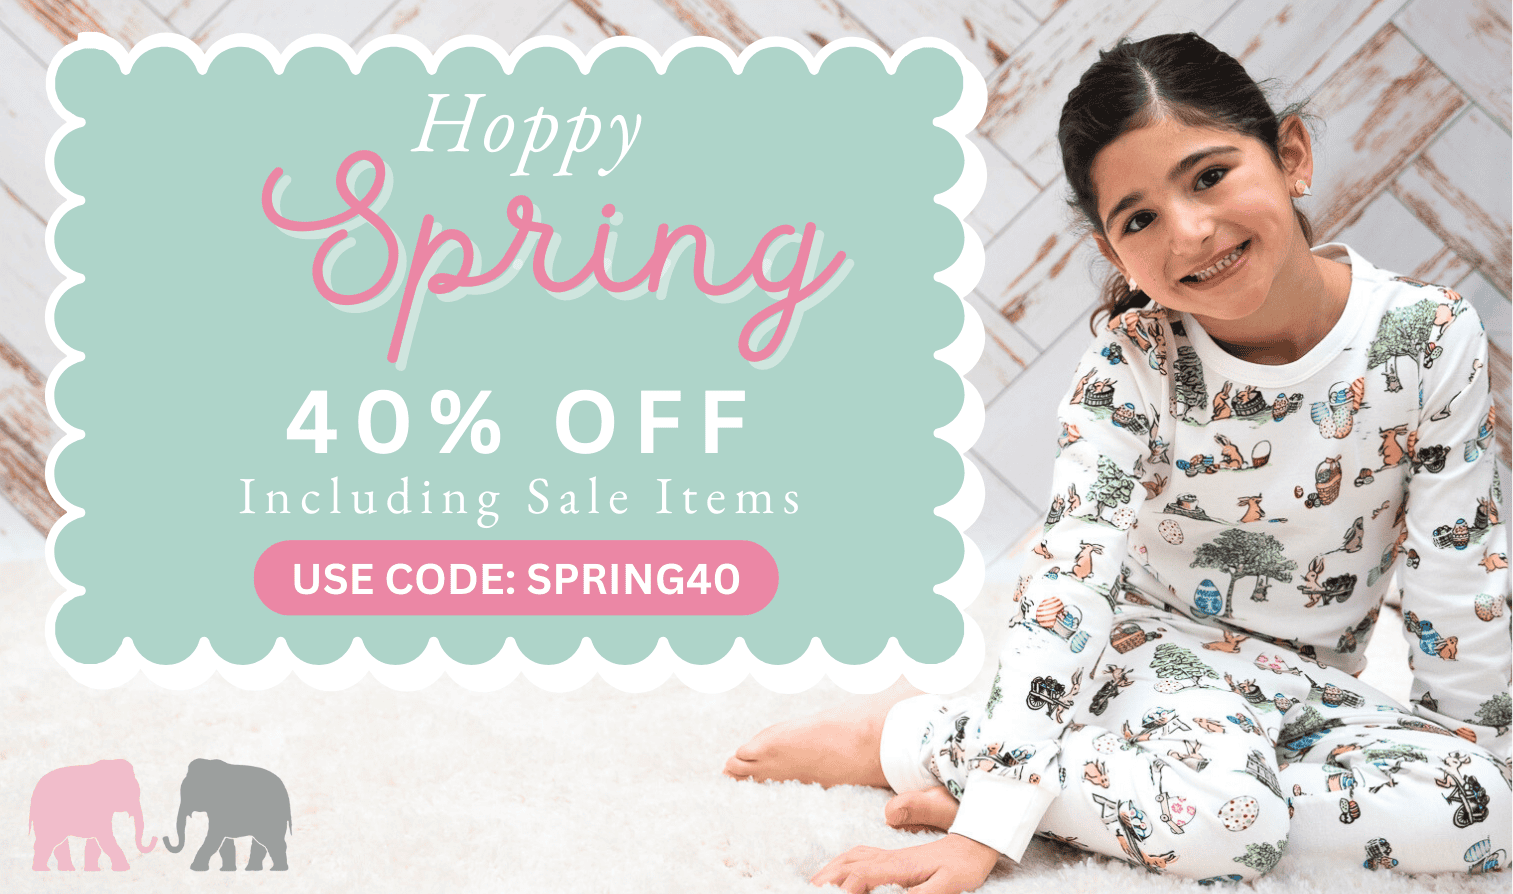 Hoppy Spring! Use Coupon Code SPRING40 to save 40% off your entire purchase including sale items.